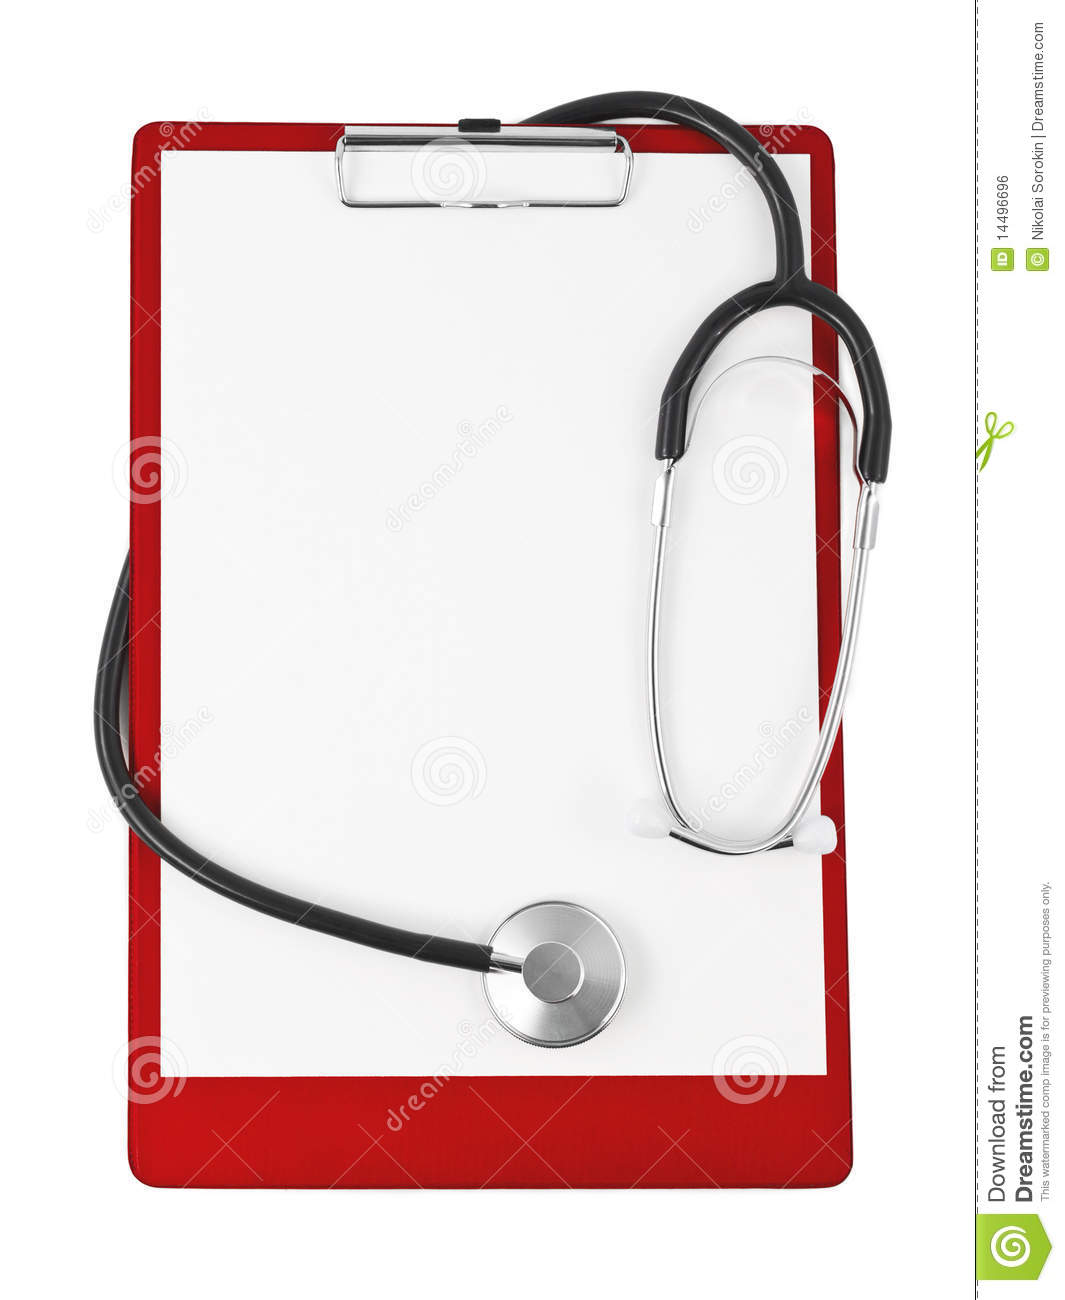 Medical Clipboard And Stethoscope Royalty Free Stock Image   Image